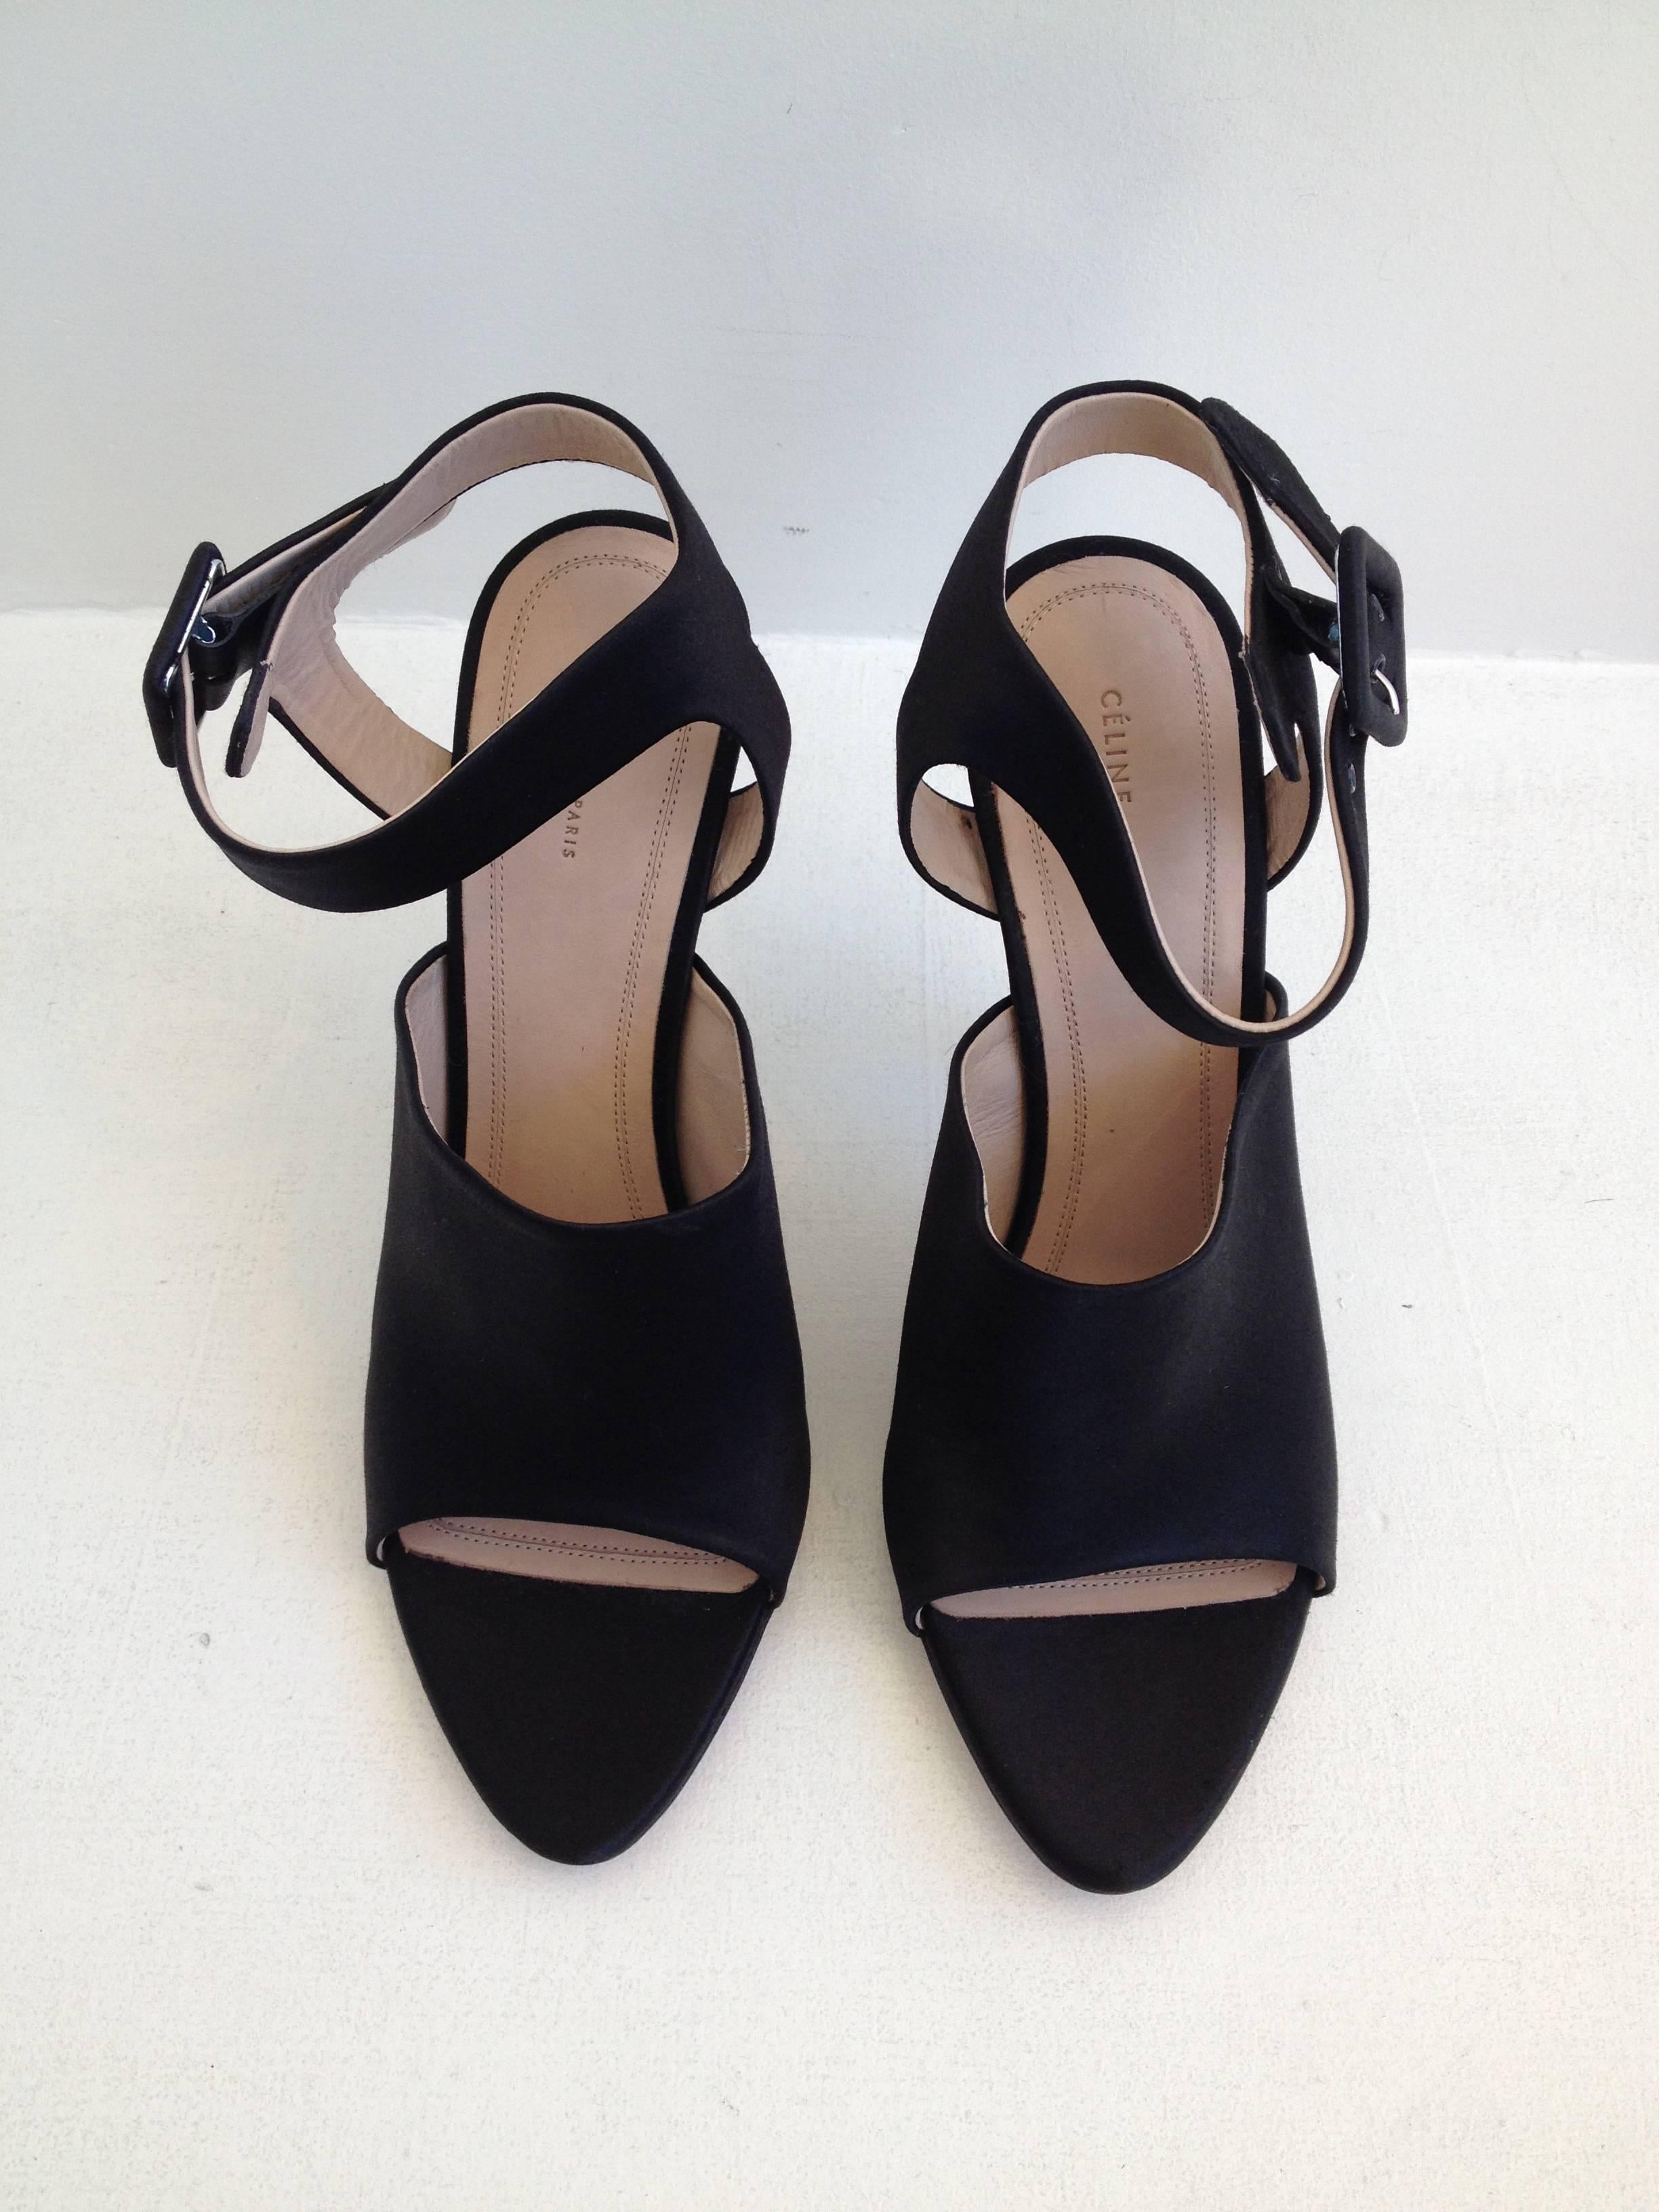 Modern, architectural, and edgy, they're beautiful and cool at the same time. The front is mule-like but with a cutout toe, while the back has a wide ankle strap and a high 4.5 inch stiletto heel. So sleek!